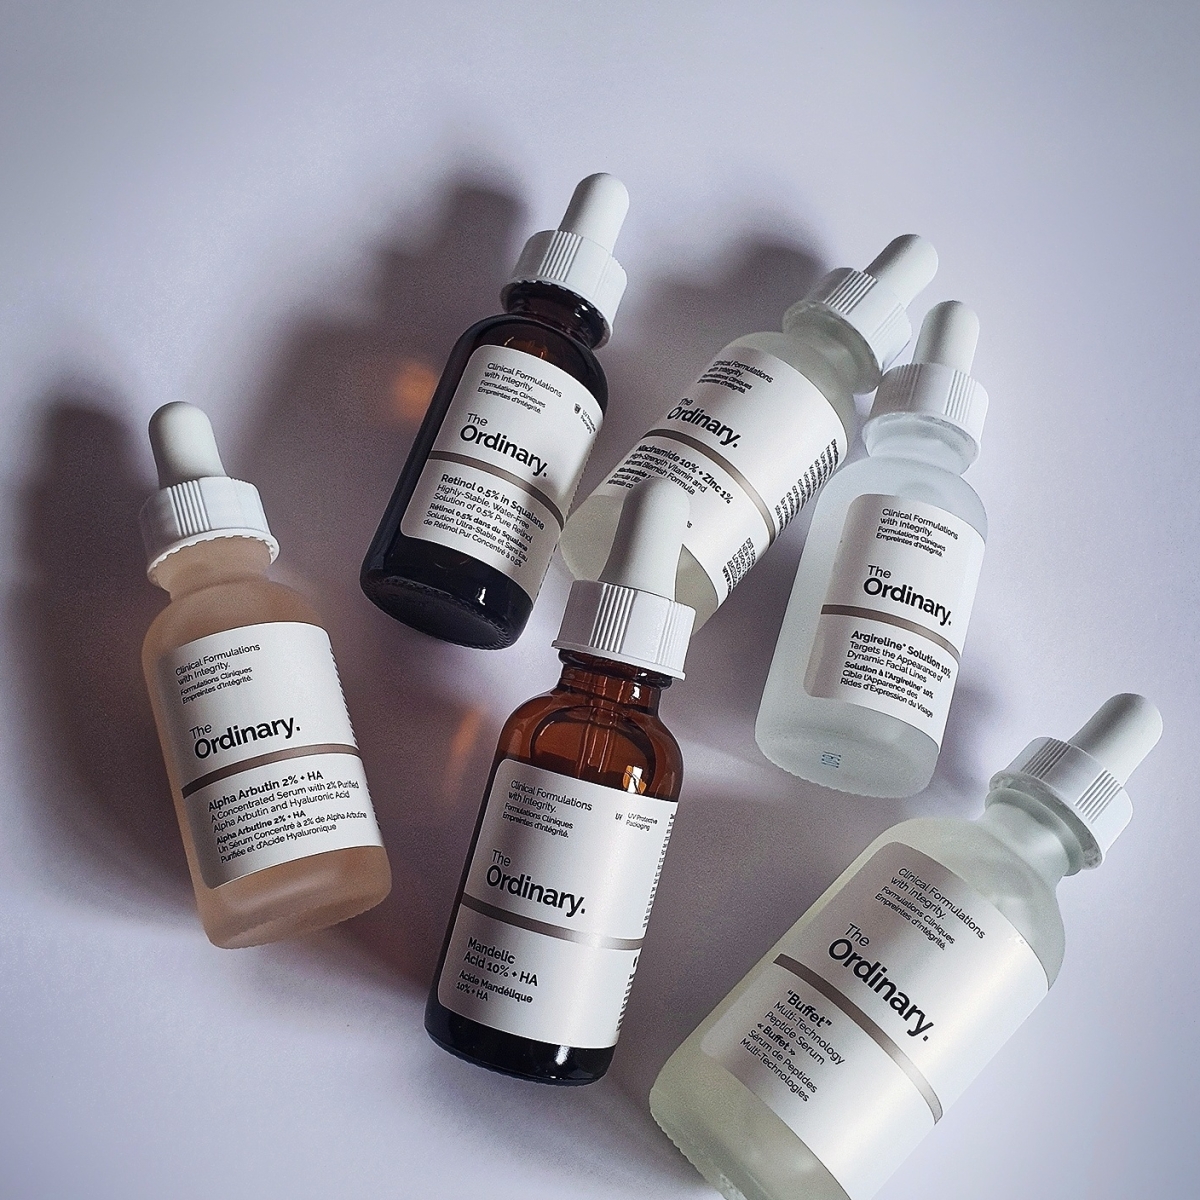 The Ordinary for Acne-Prone, Anti-Aging for People of Colour